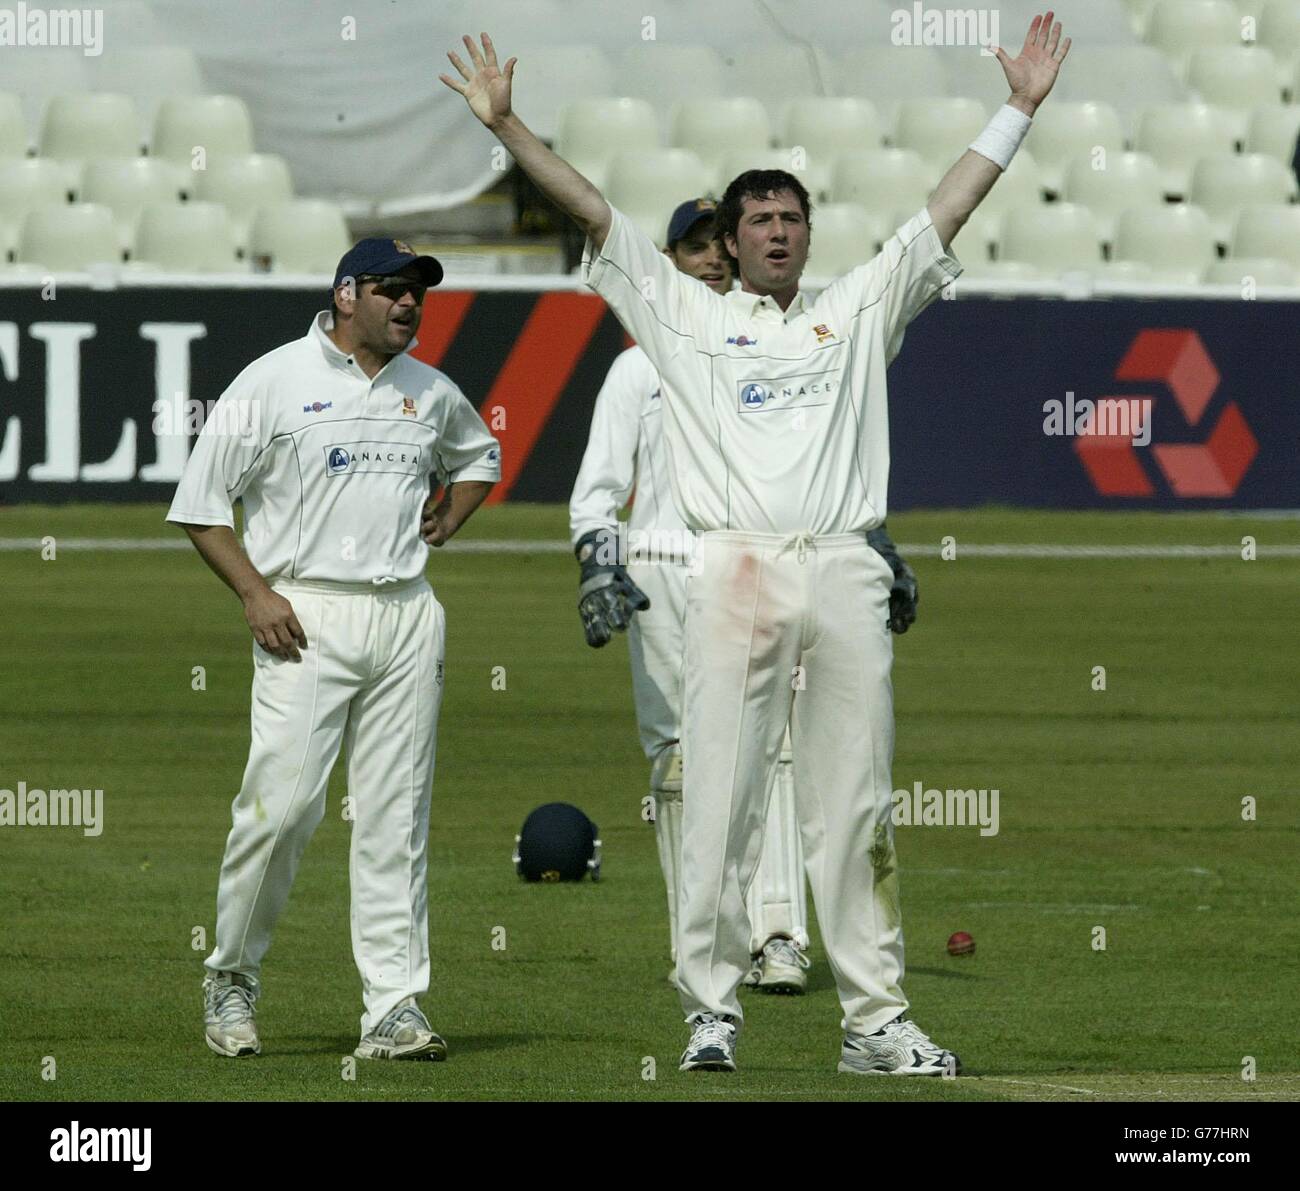 Fustrated Essex captain Ronnie Irani appeals in vain to umpire John Steele after Irani thought he got Warwickshire's Dominic Ostler out, during first day of Frizzell County Championship match at Edgbaston, Birmingham. Stock Photo